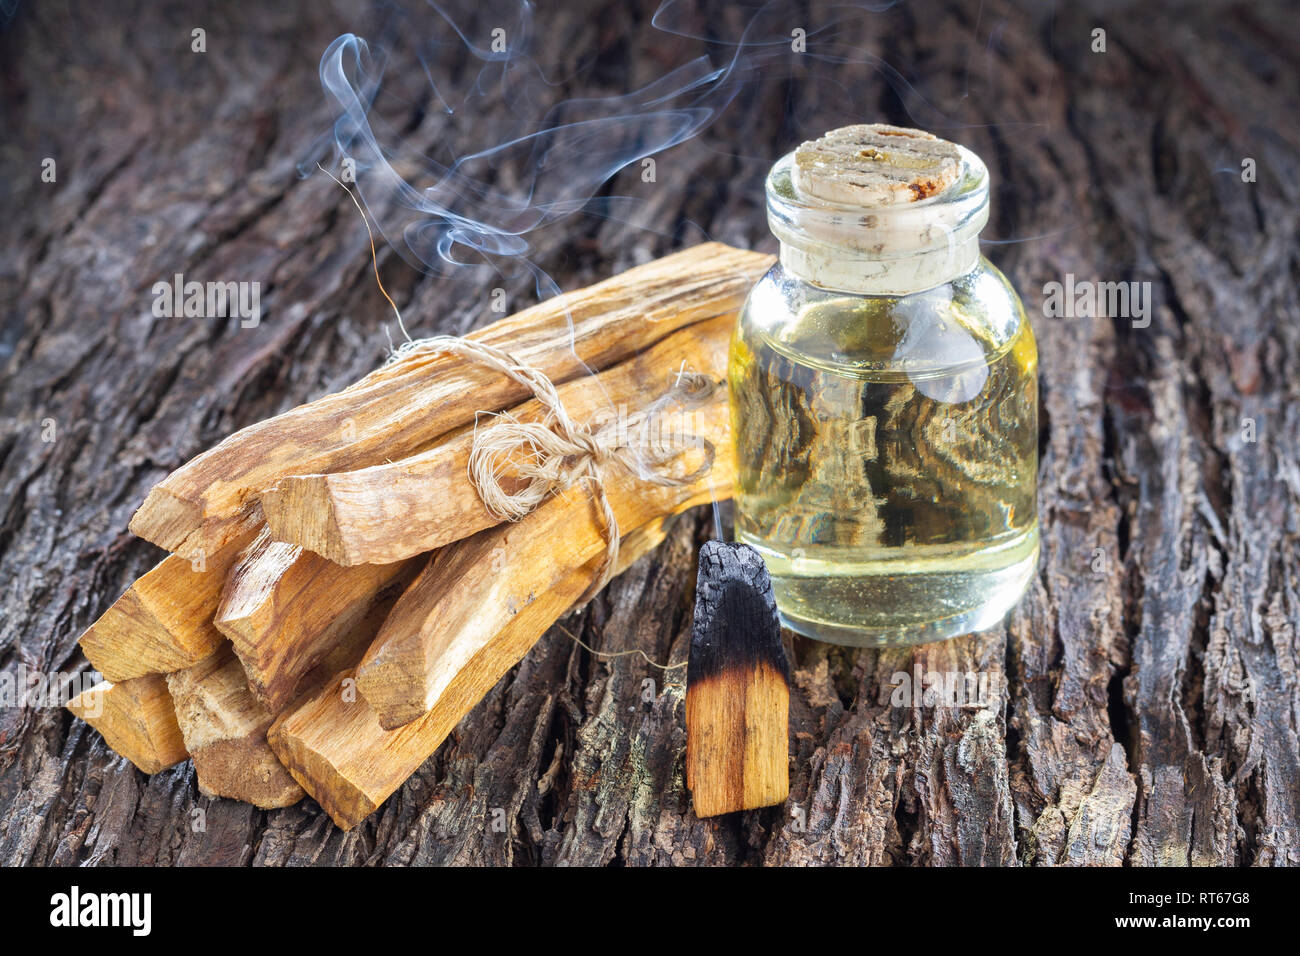 Bursera graveolens, essence and resin. in Spanish ('palo santo') is a wild tree in Latin America. used as incense. Stock Photo